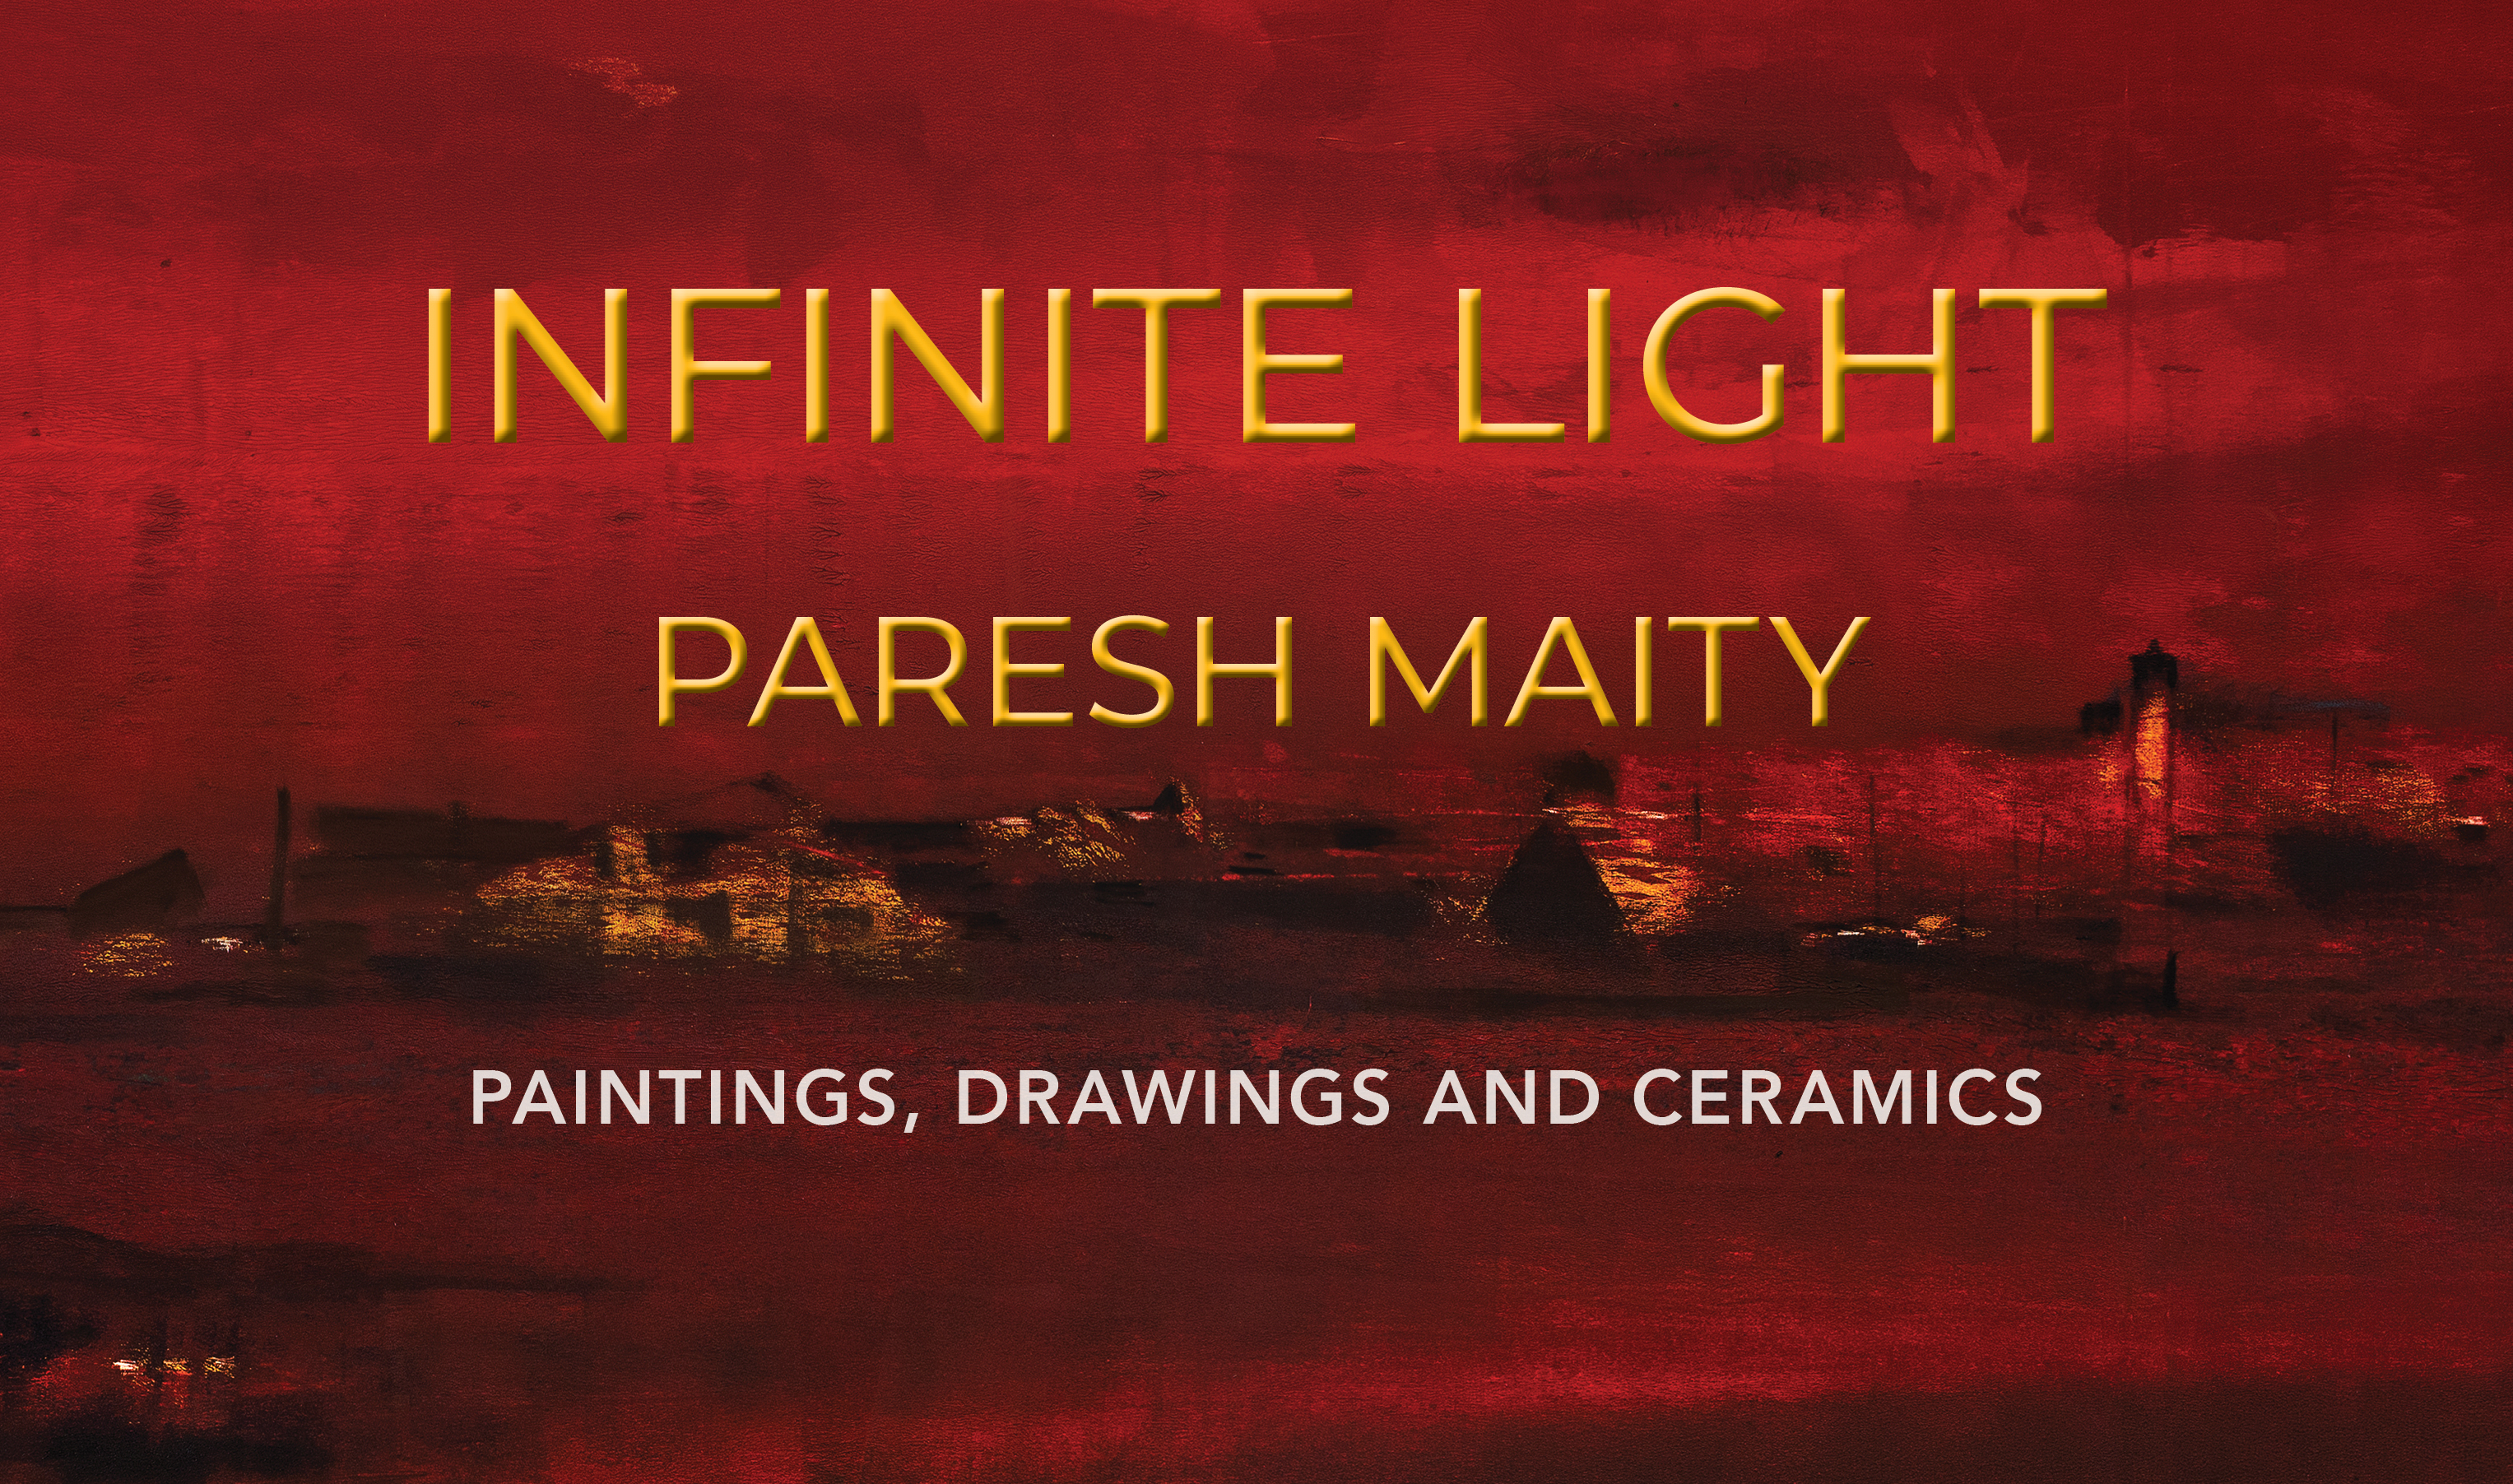 INFINITE LIGHT | A Solo Exhibition of Paresh Maity